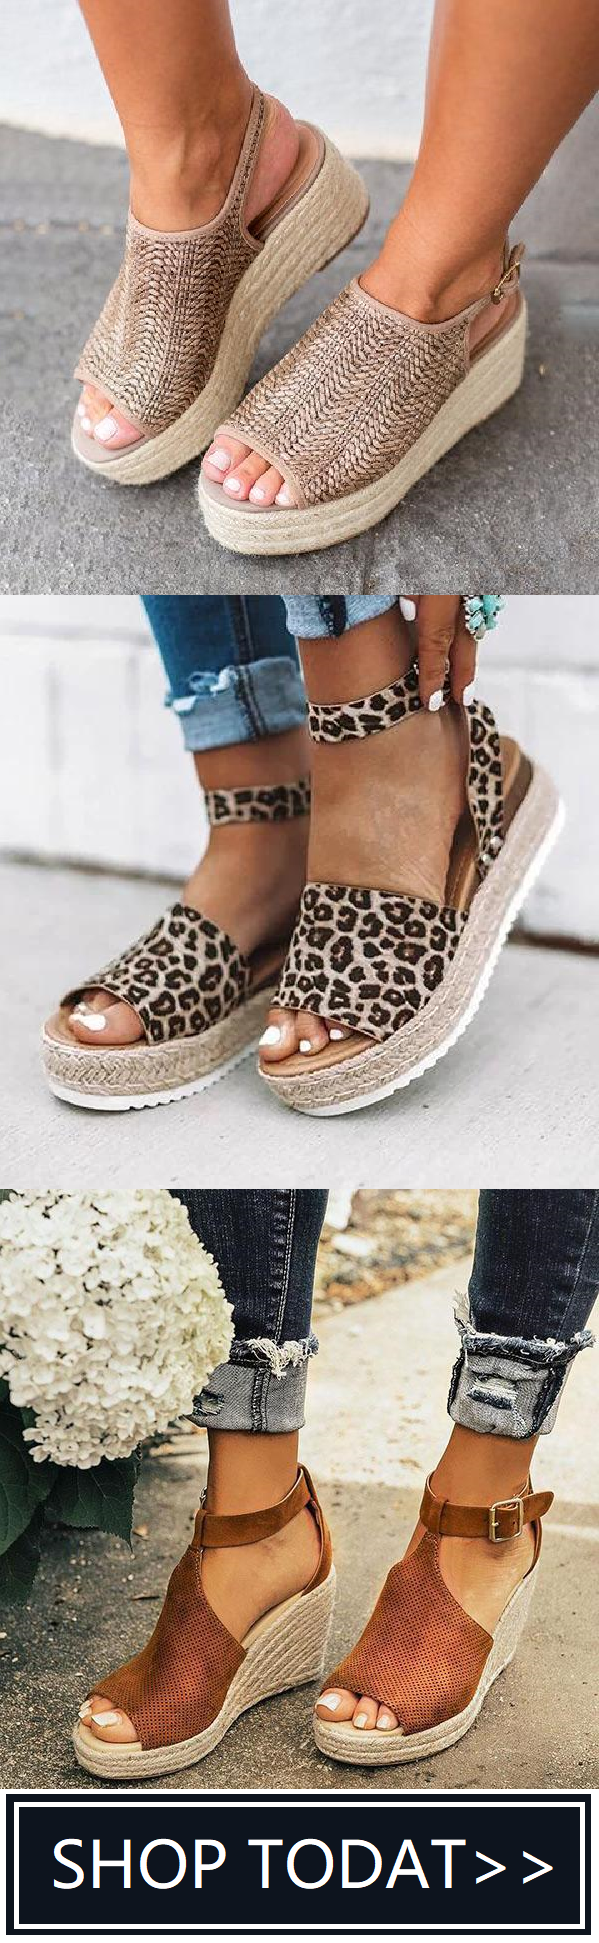 рџ›’Shop Now>> Up to 75% OFFрџЊ№ Buy More Save MoreрџЊ№ 100+ 2019 Best Spring Summer Sandals for You.Best Gifts for Herрџ’‹рџ’‹ -   17 feminine casual style
 ideas